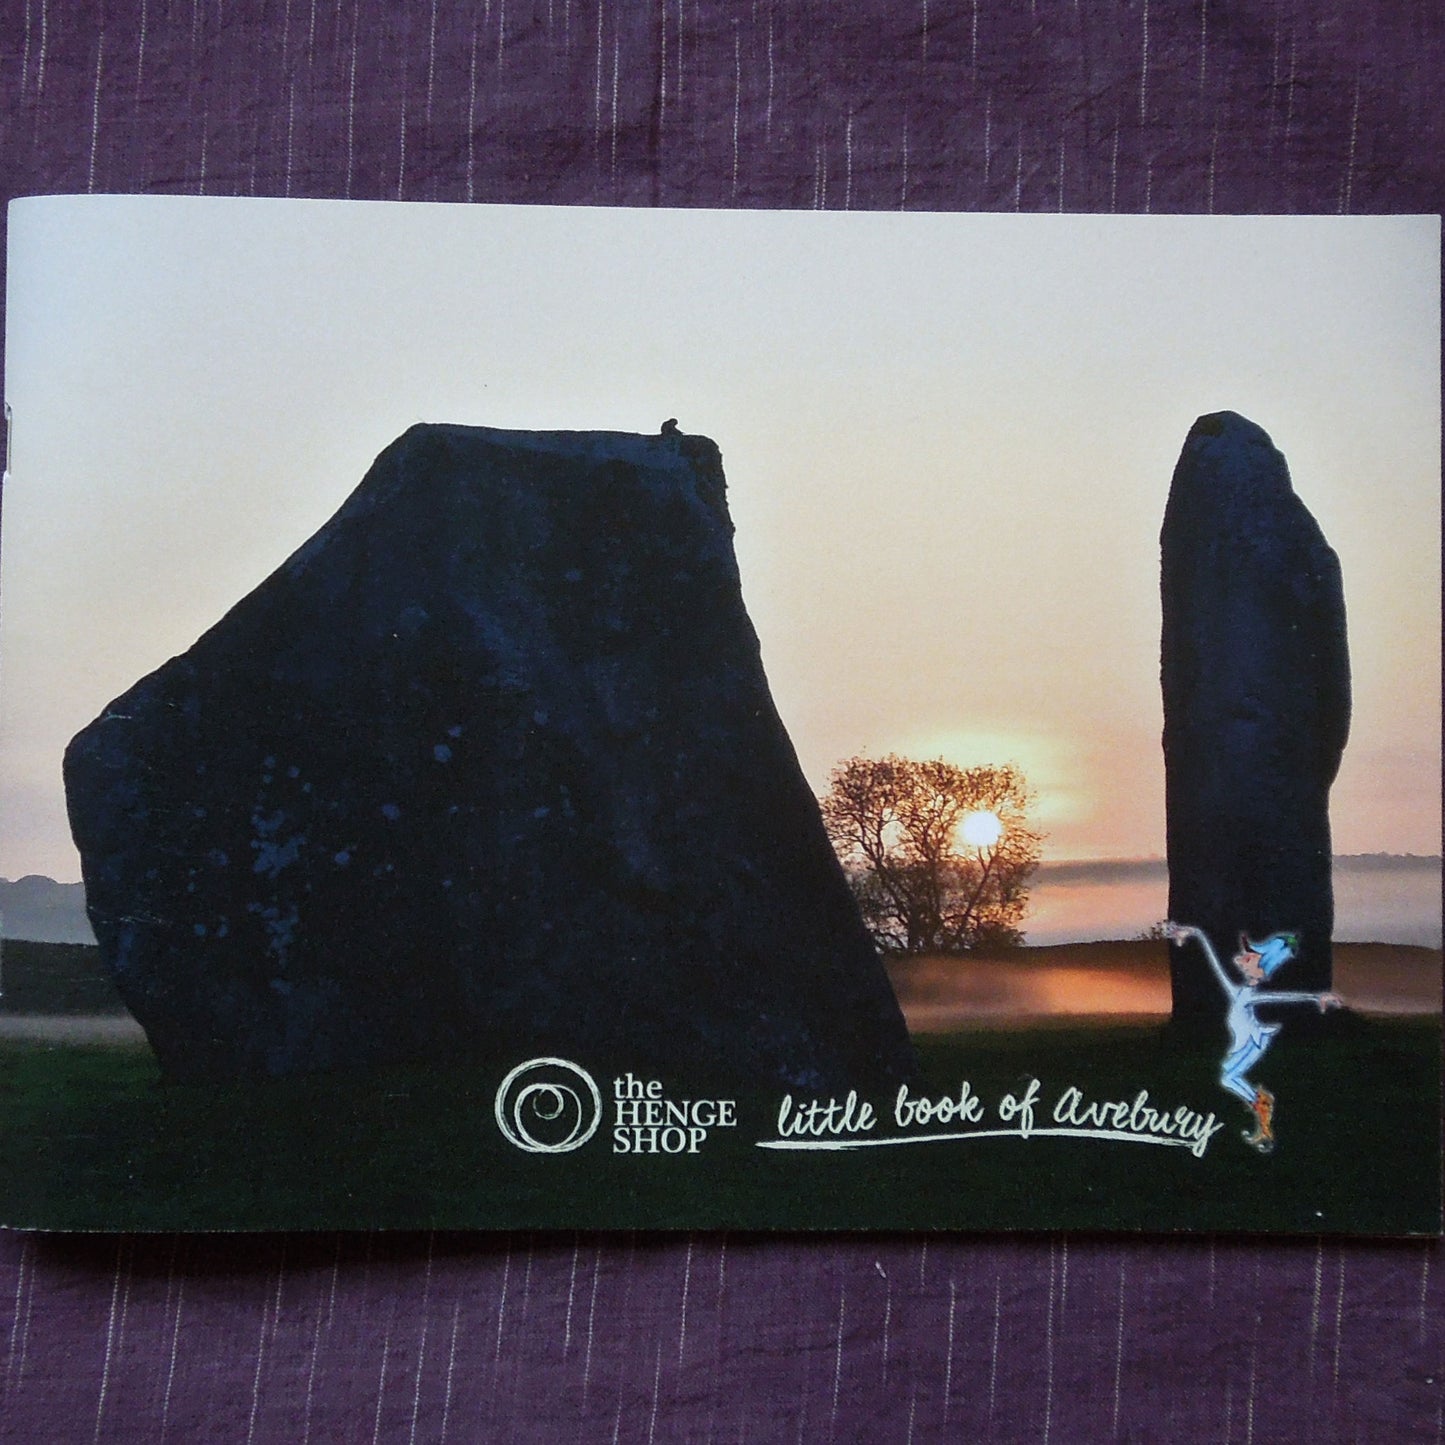 The Little book of Avebury